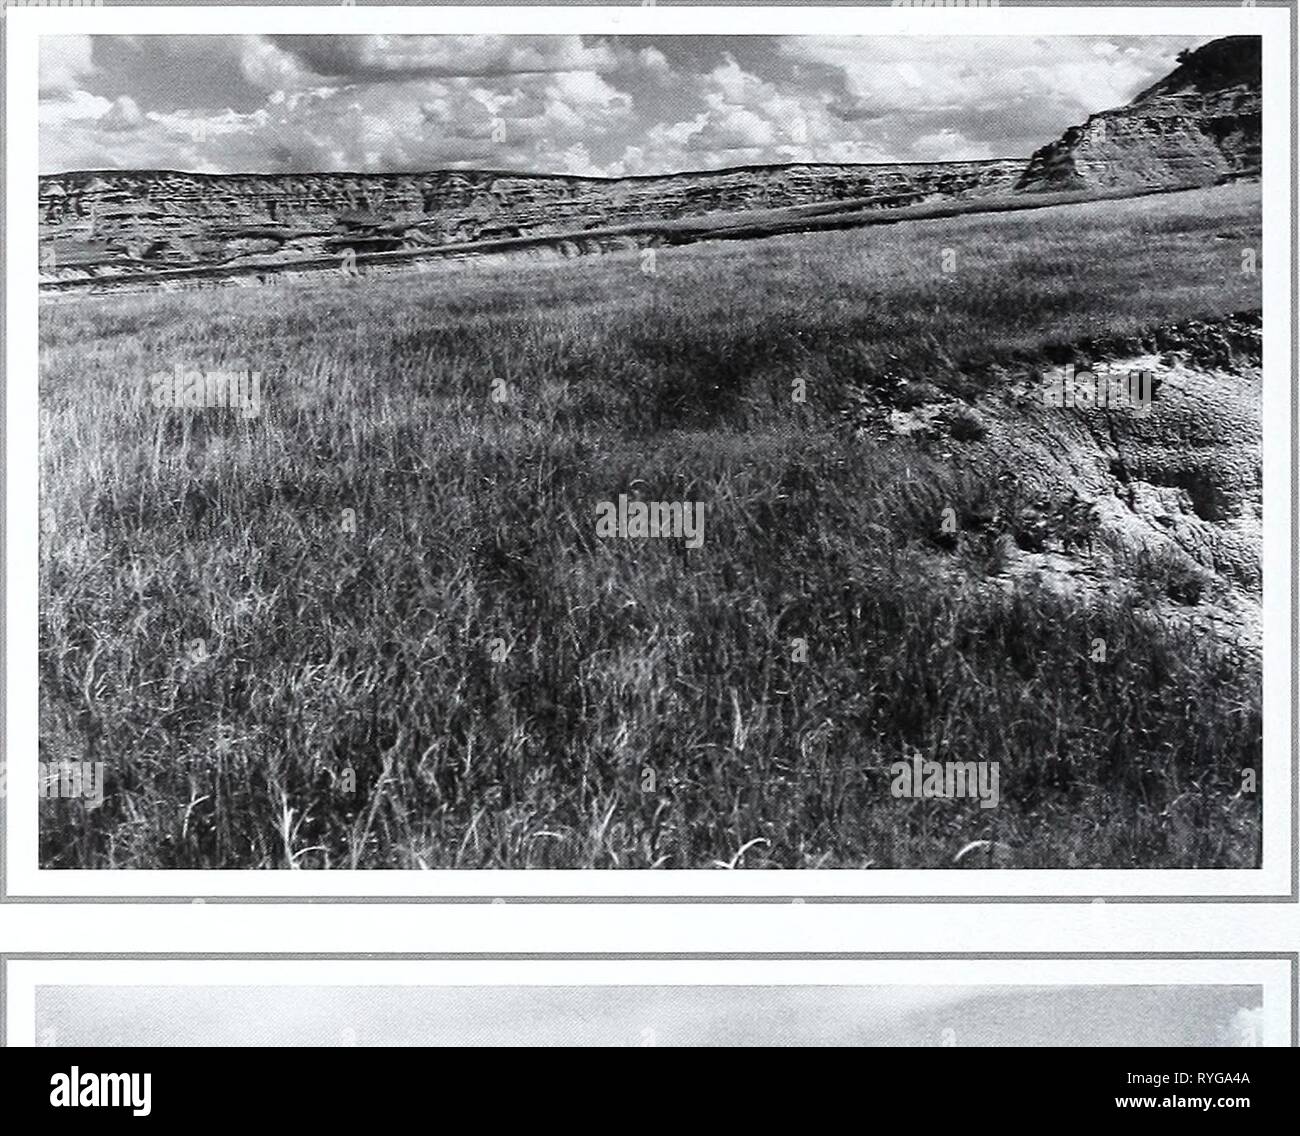 Eighty years of vegetation and landscape changes in the Northern Great Plains : a photographic record  eightyyearsofveg45klem Year: 2001  Original Photograph July 3, 1927. Shantz P-10-1927. Facing northeast. First Retake and Description June 16, 1958. W.S.P.. C-6-1958. This is a typical area of short grass plains. There has been very little change over the period of the two pictures and the same grasses are present in both pictures. The main plants are Bouteloua spp., Stipa comata and Aristida spp. (from Phillips 1963, p. 95). Second Retake August 2, 1998. Kay-4356-19A. â . ,, , ,,   ly^v--  - Stock Photo